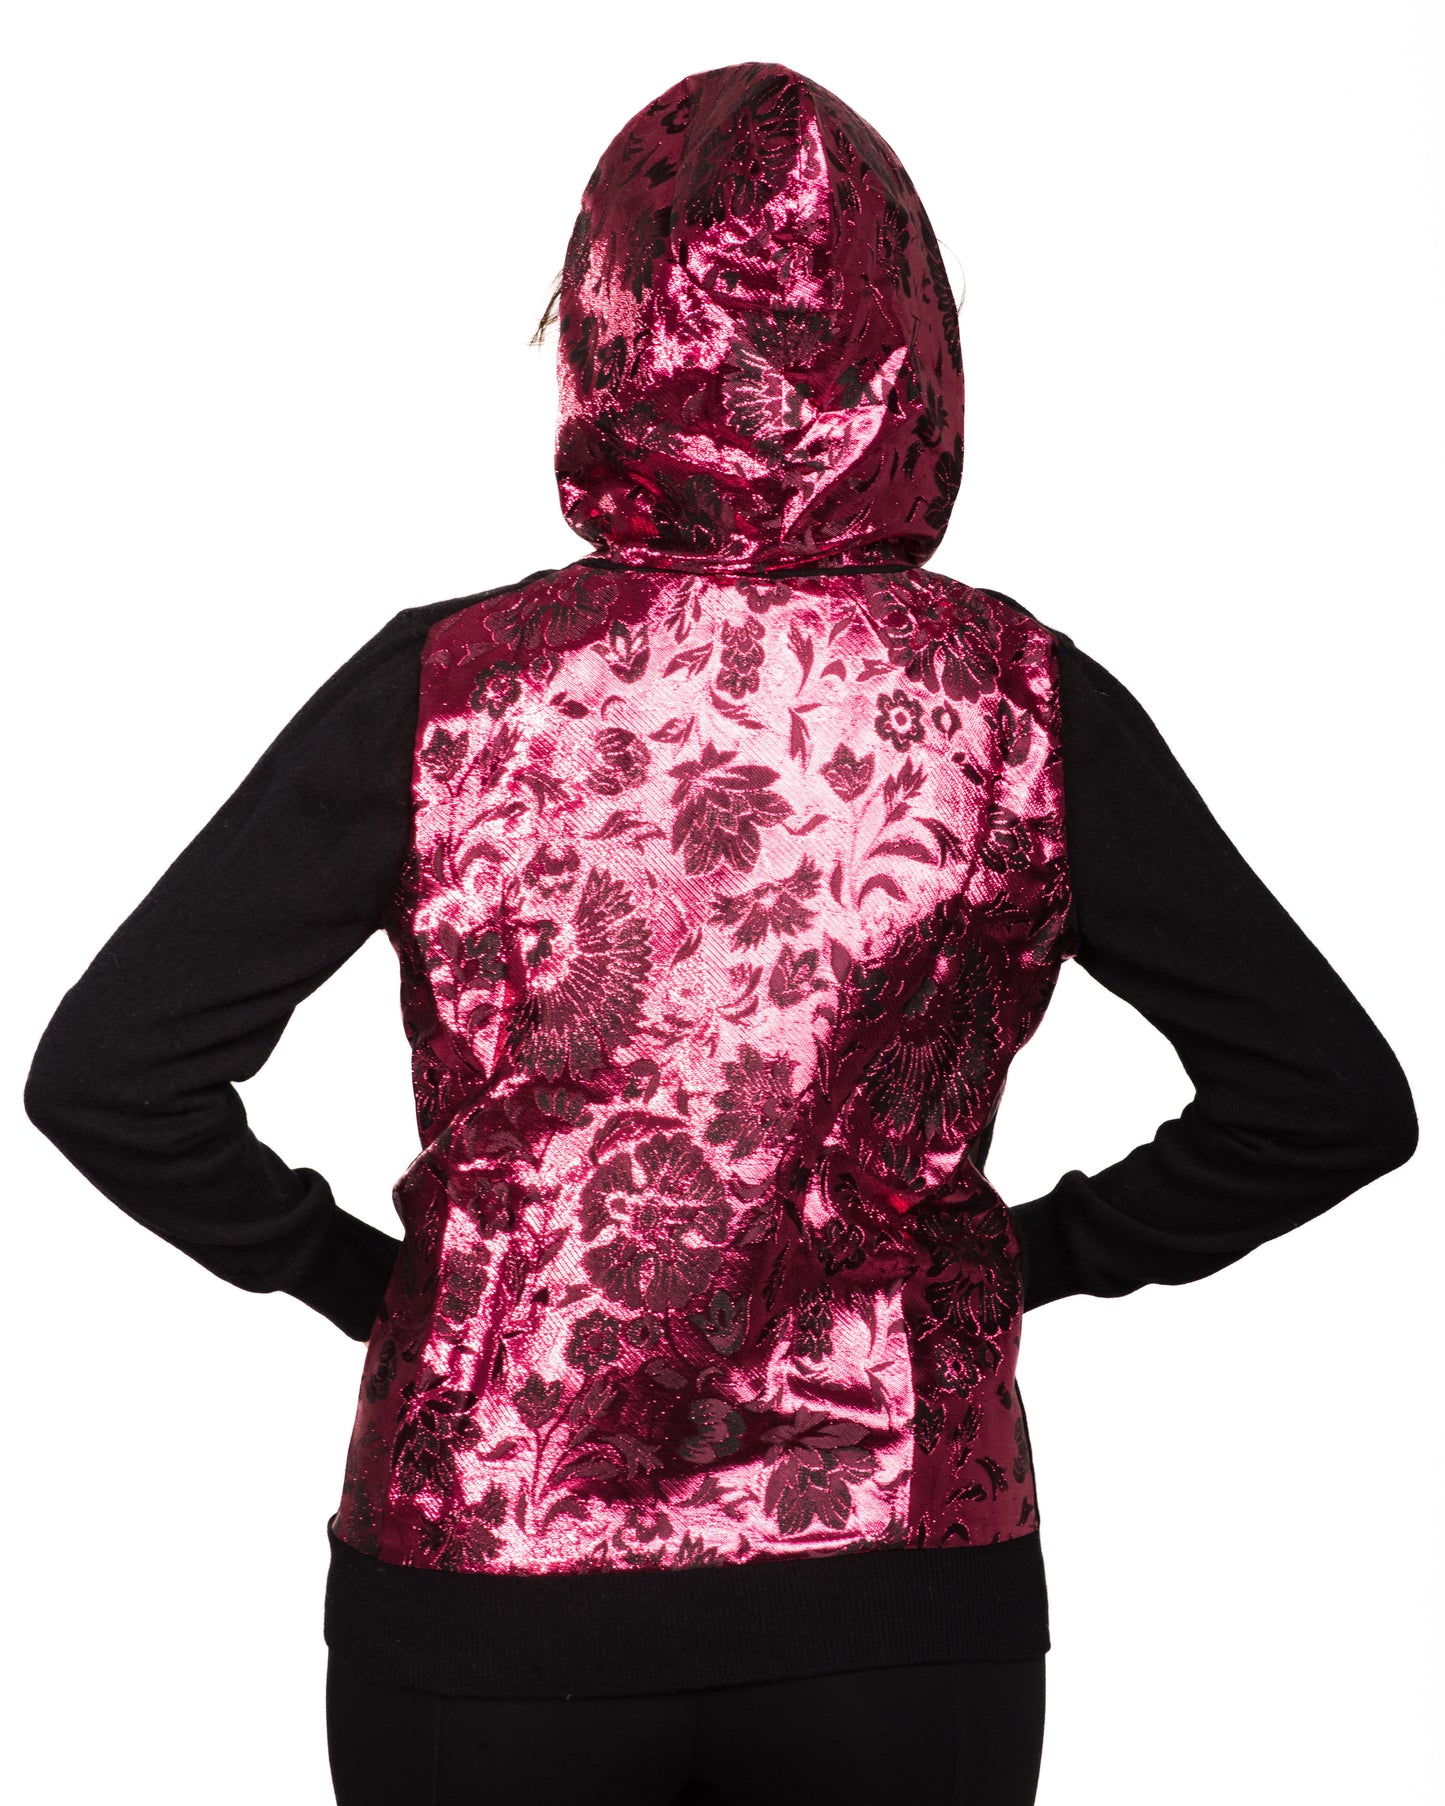 MEDIUM BLACK LONG SLEEVE CASHMERE HOODIE WITH HOOD AND BACK OF PINK AND BLACK METALLIC BROCADE